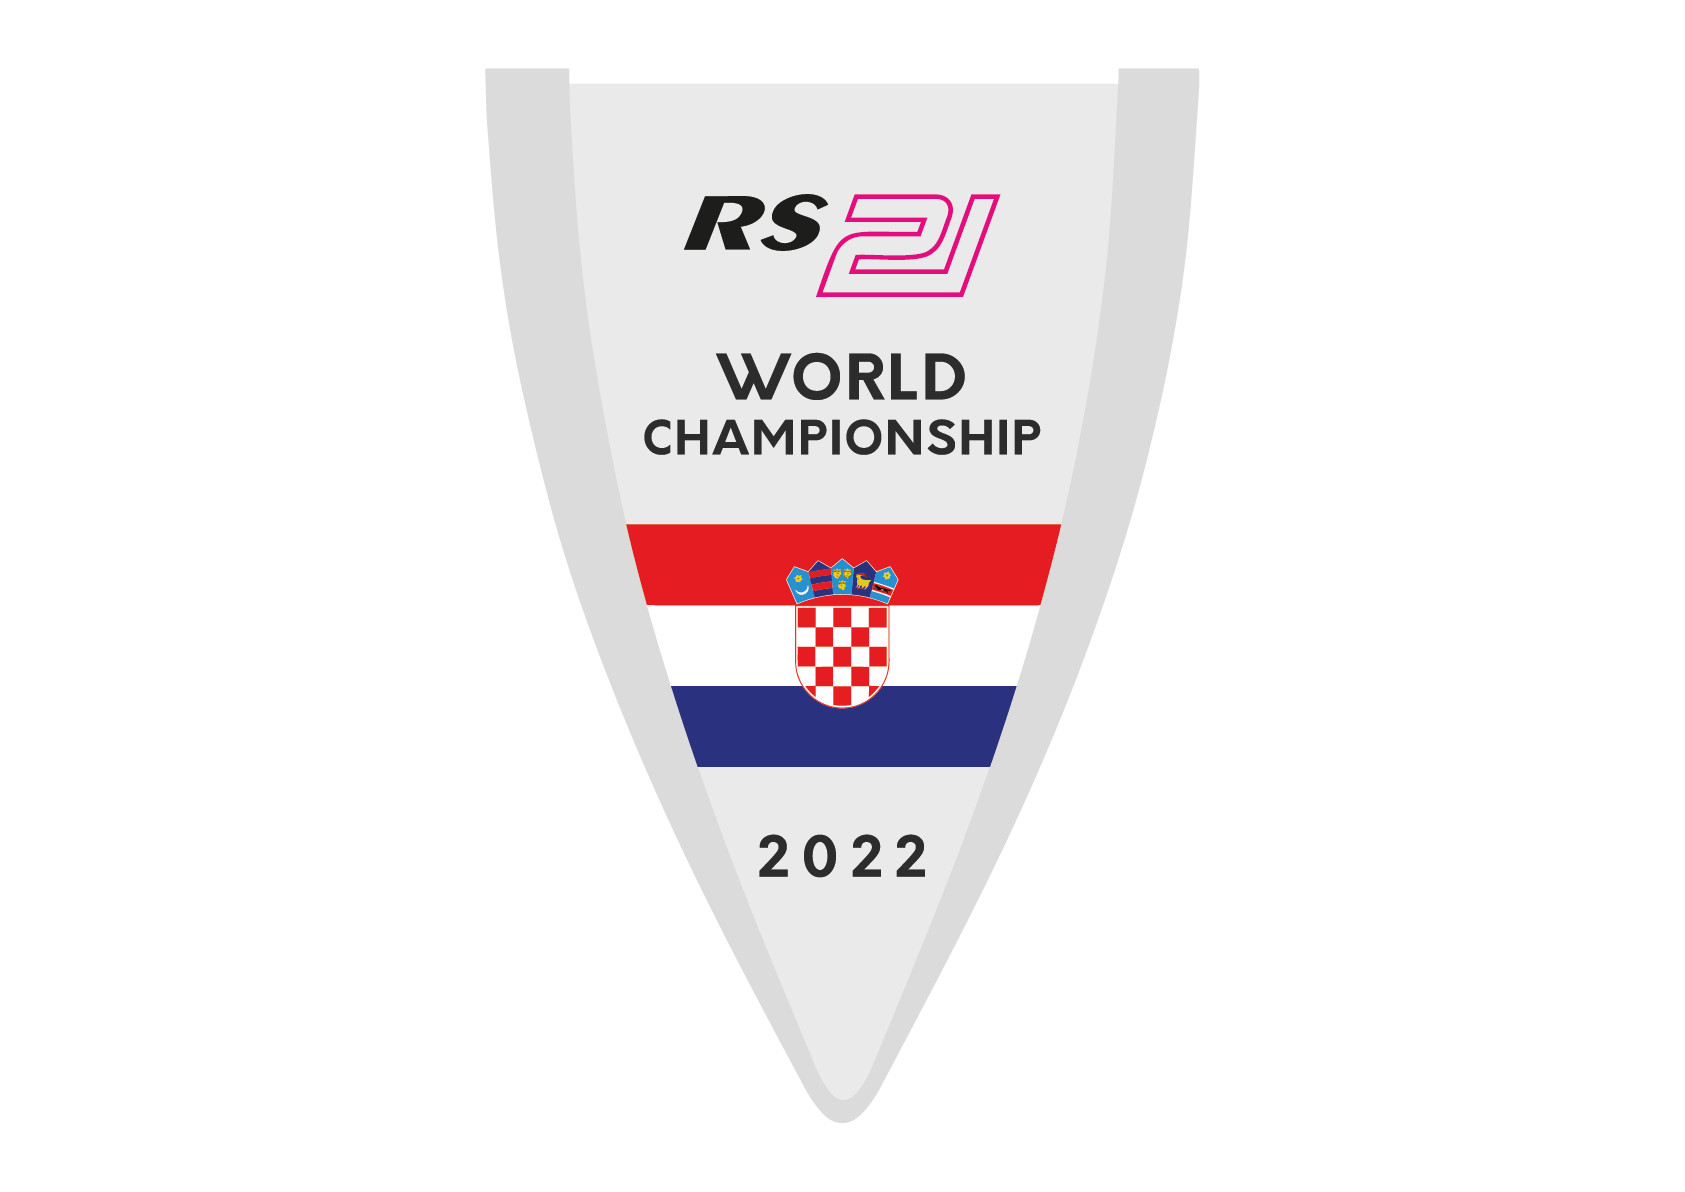 RS21 Worlds 2022